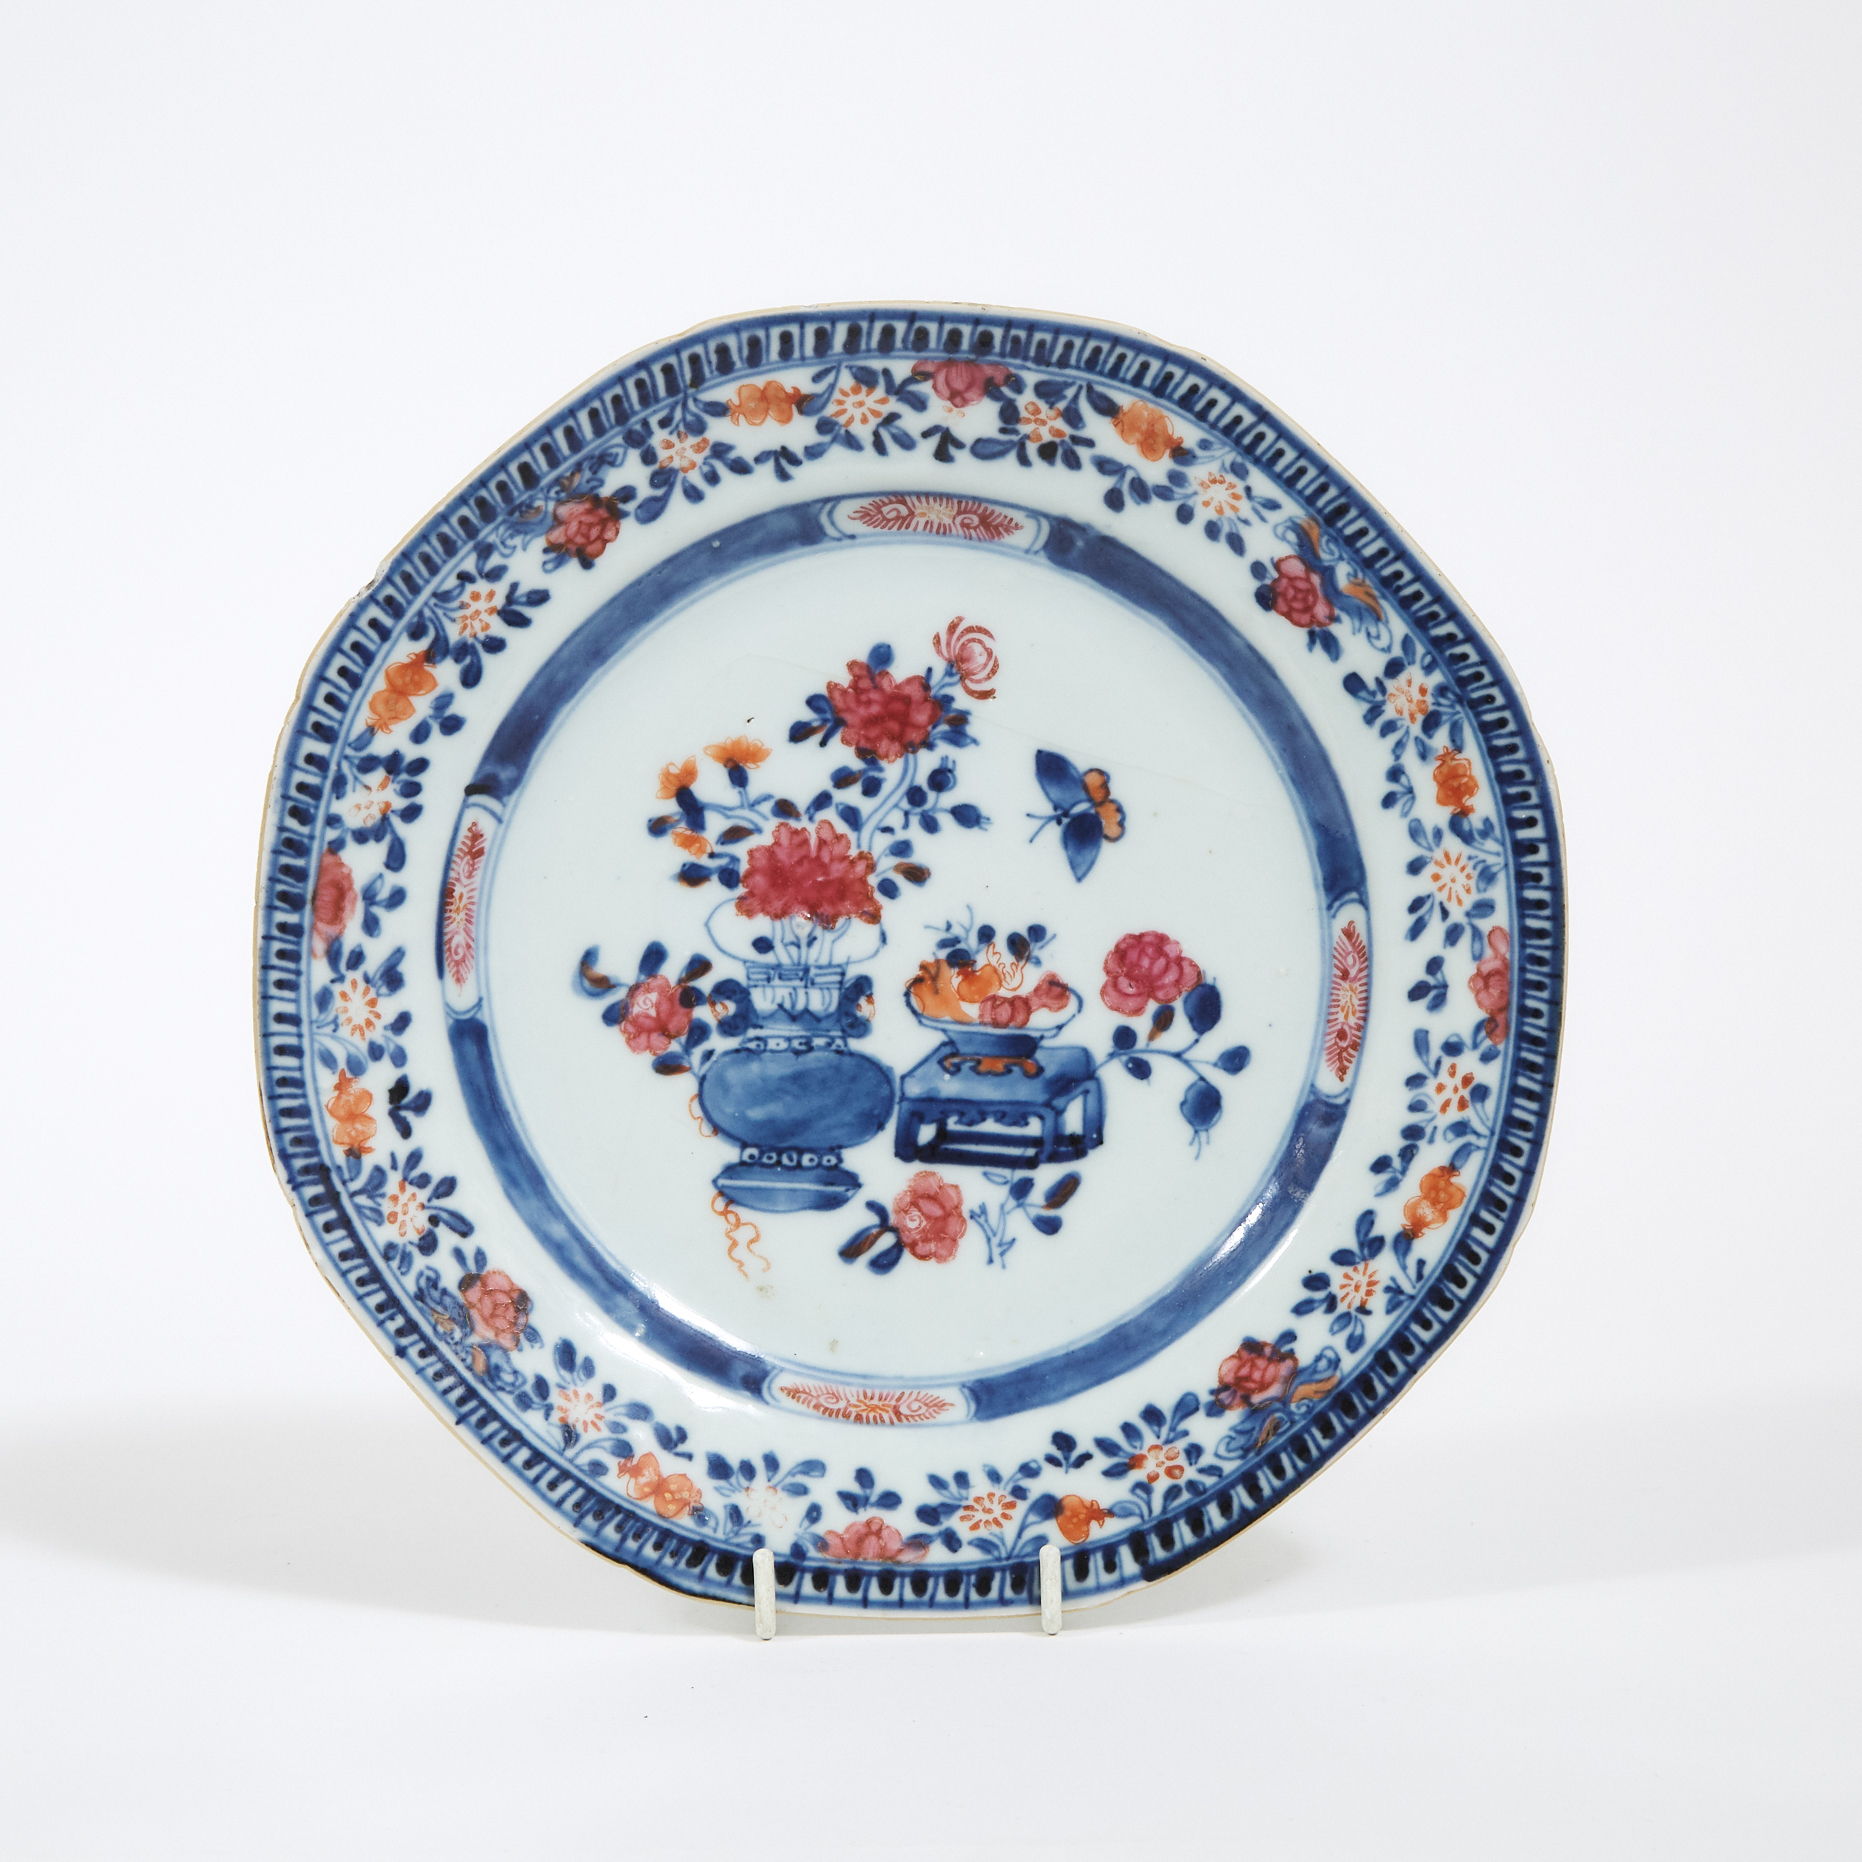 A Chinese Export Octagonal Blue and White Overglaze-Red 'Rose' Plate, Qianlong Period, 18th Century